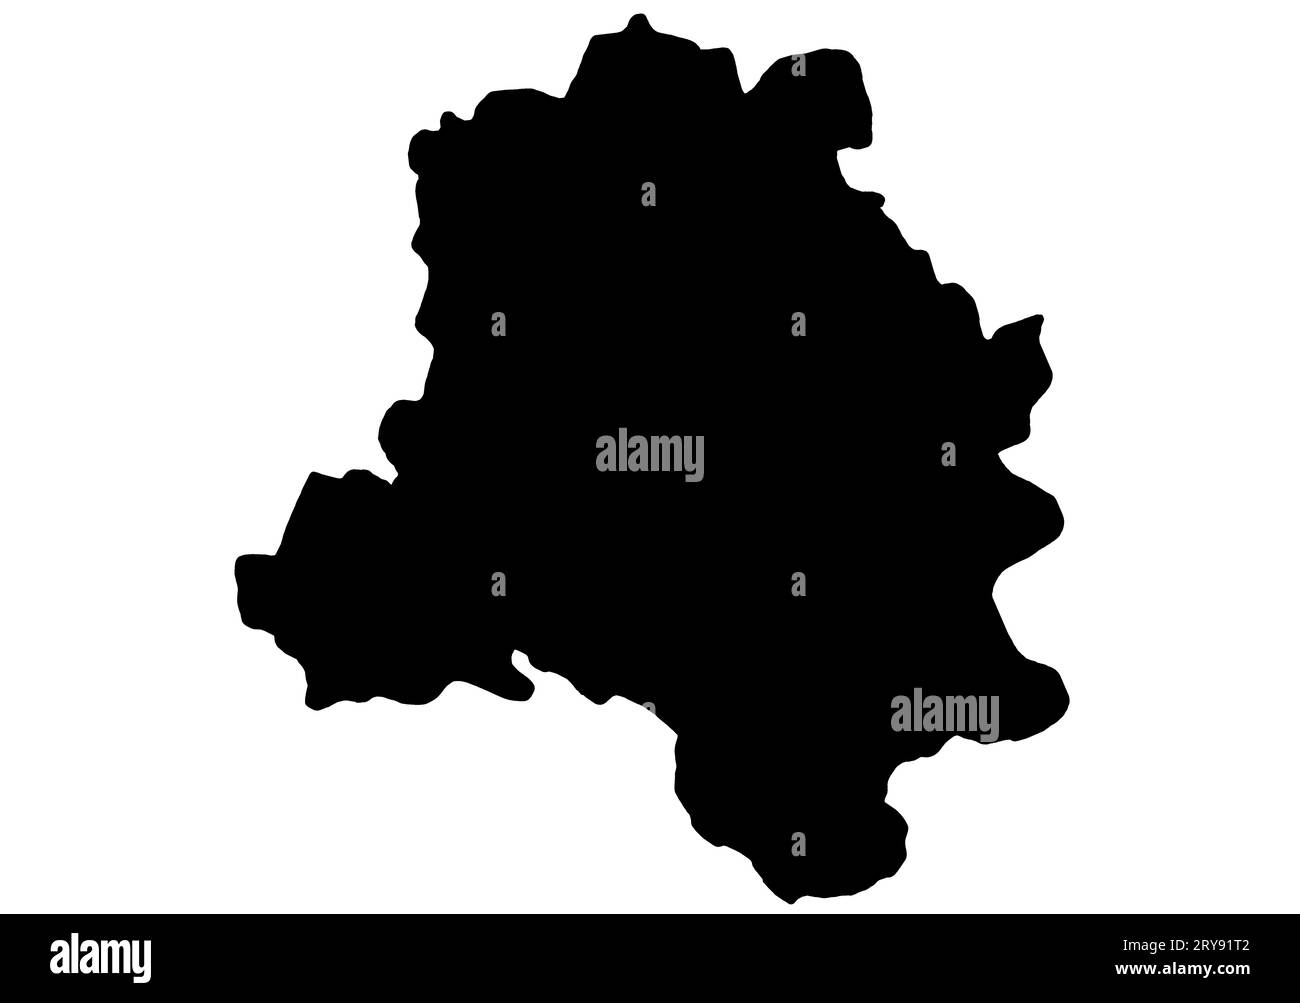 Delhi, India Map Black Silhouette and Outline Isolated on White. Stock Photo